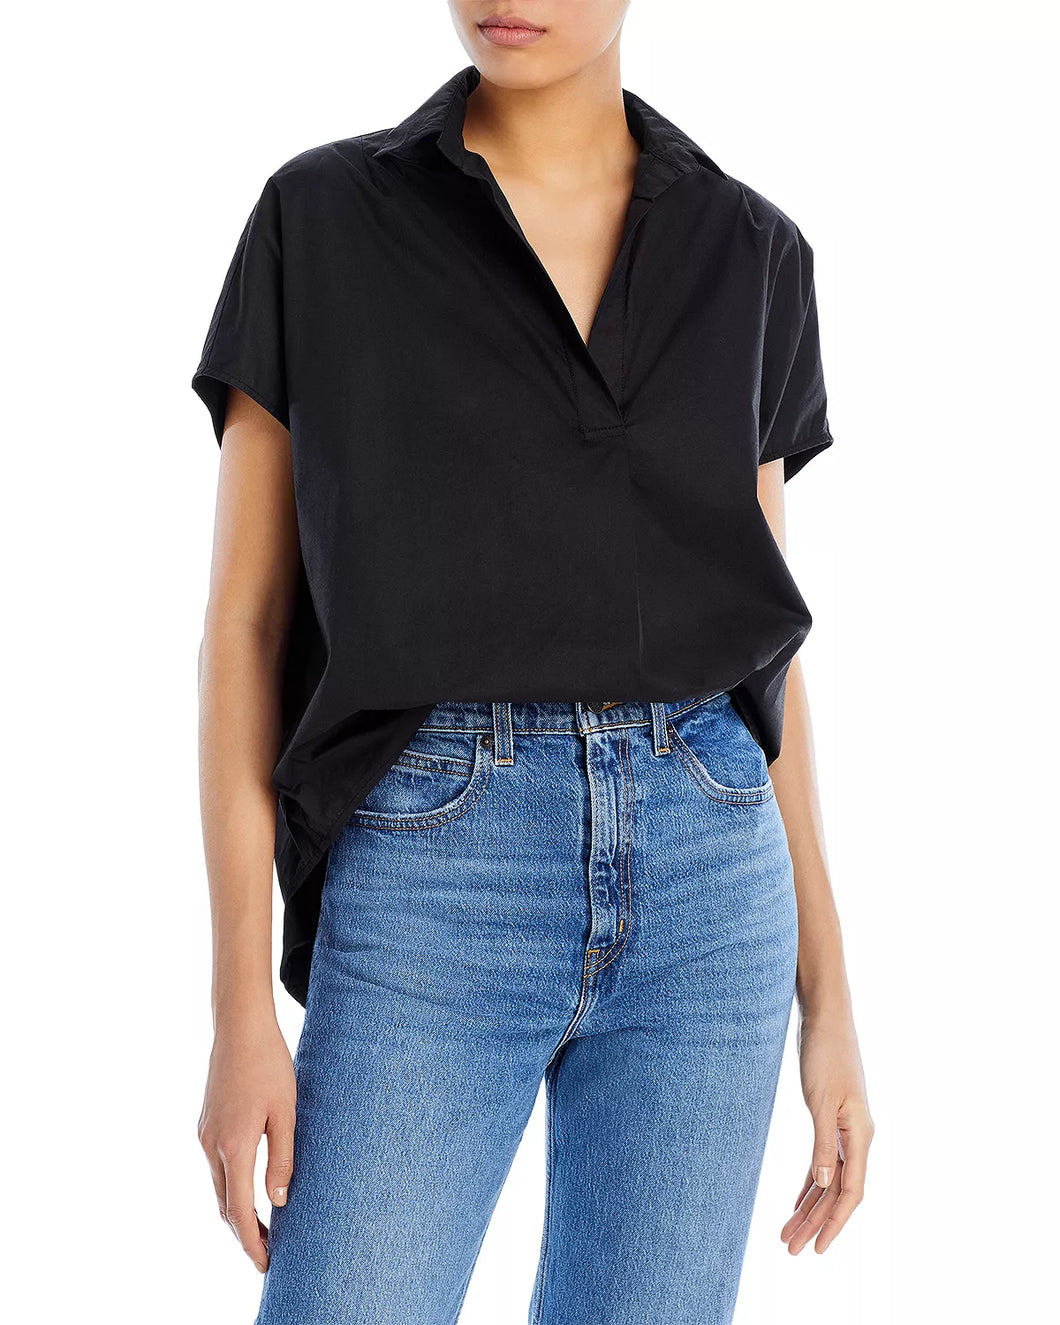 Short Sleeve Poplin Pullover Blouse with collar and high low hem-available in red and black